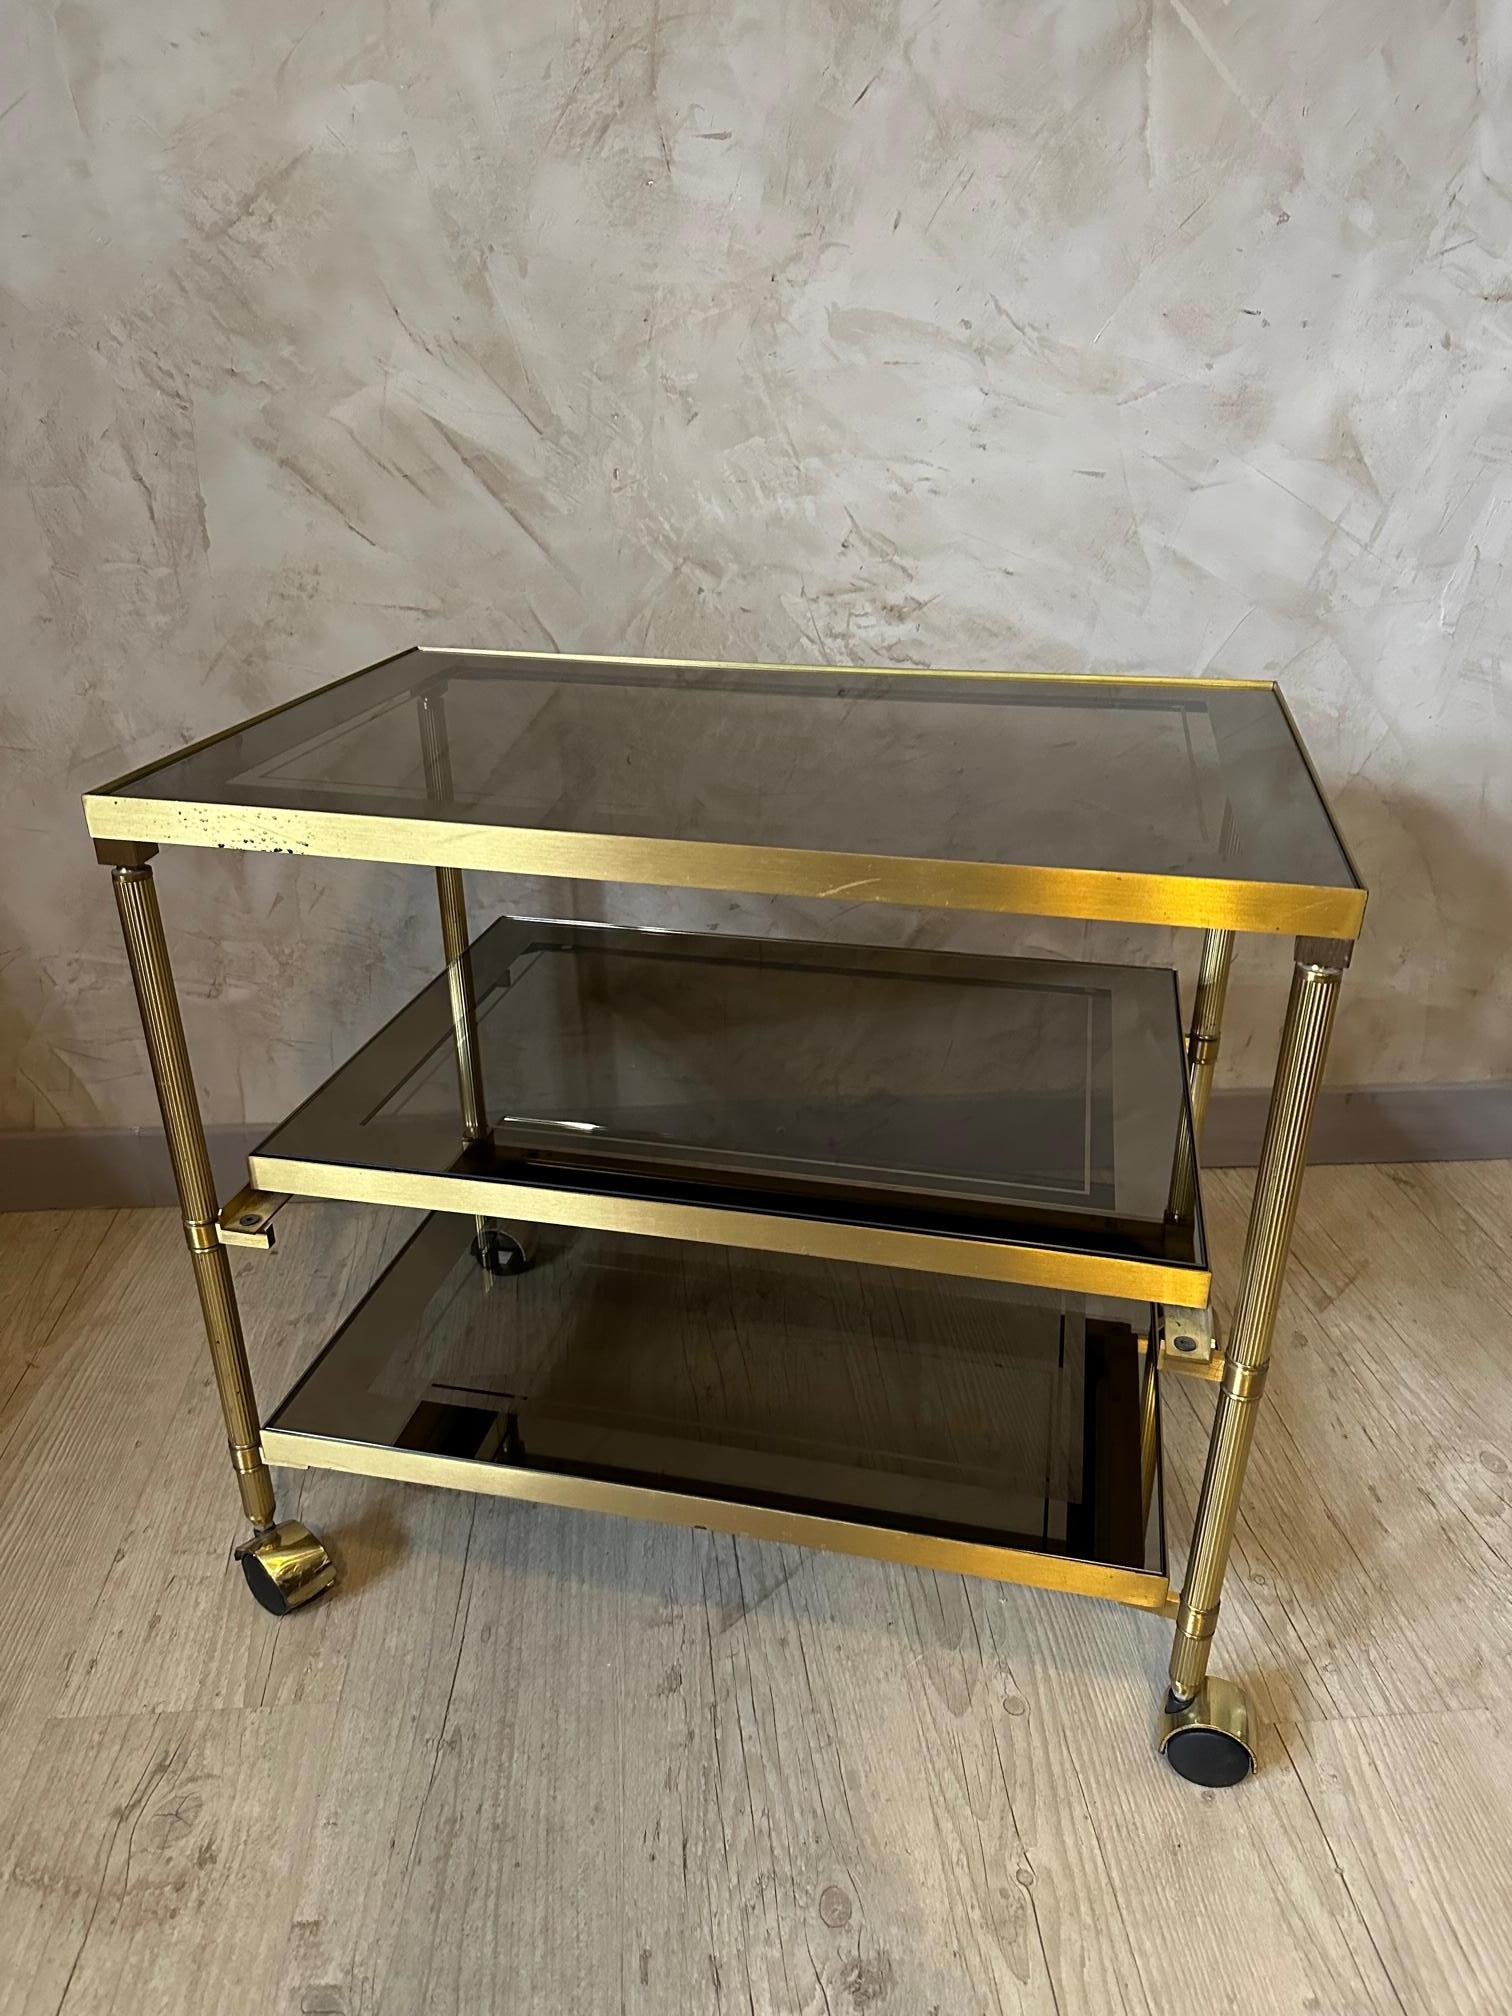 Very nice vintage dessert table from the 70s in brass and removable trays in smoked glass. Sliding middle shelf. Nice quality and good condition.